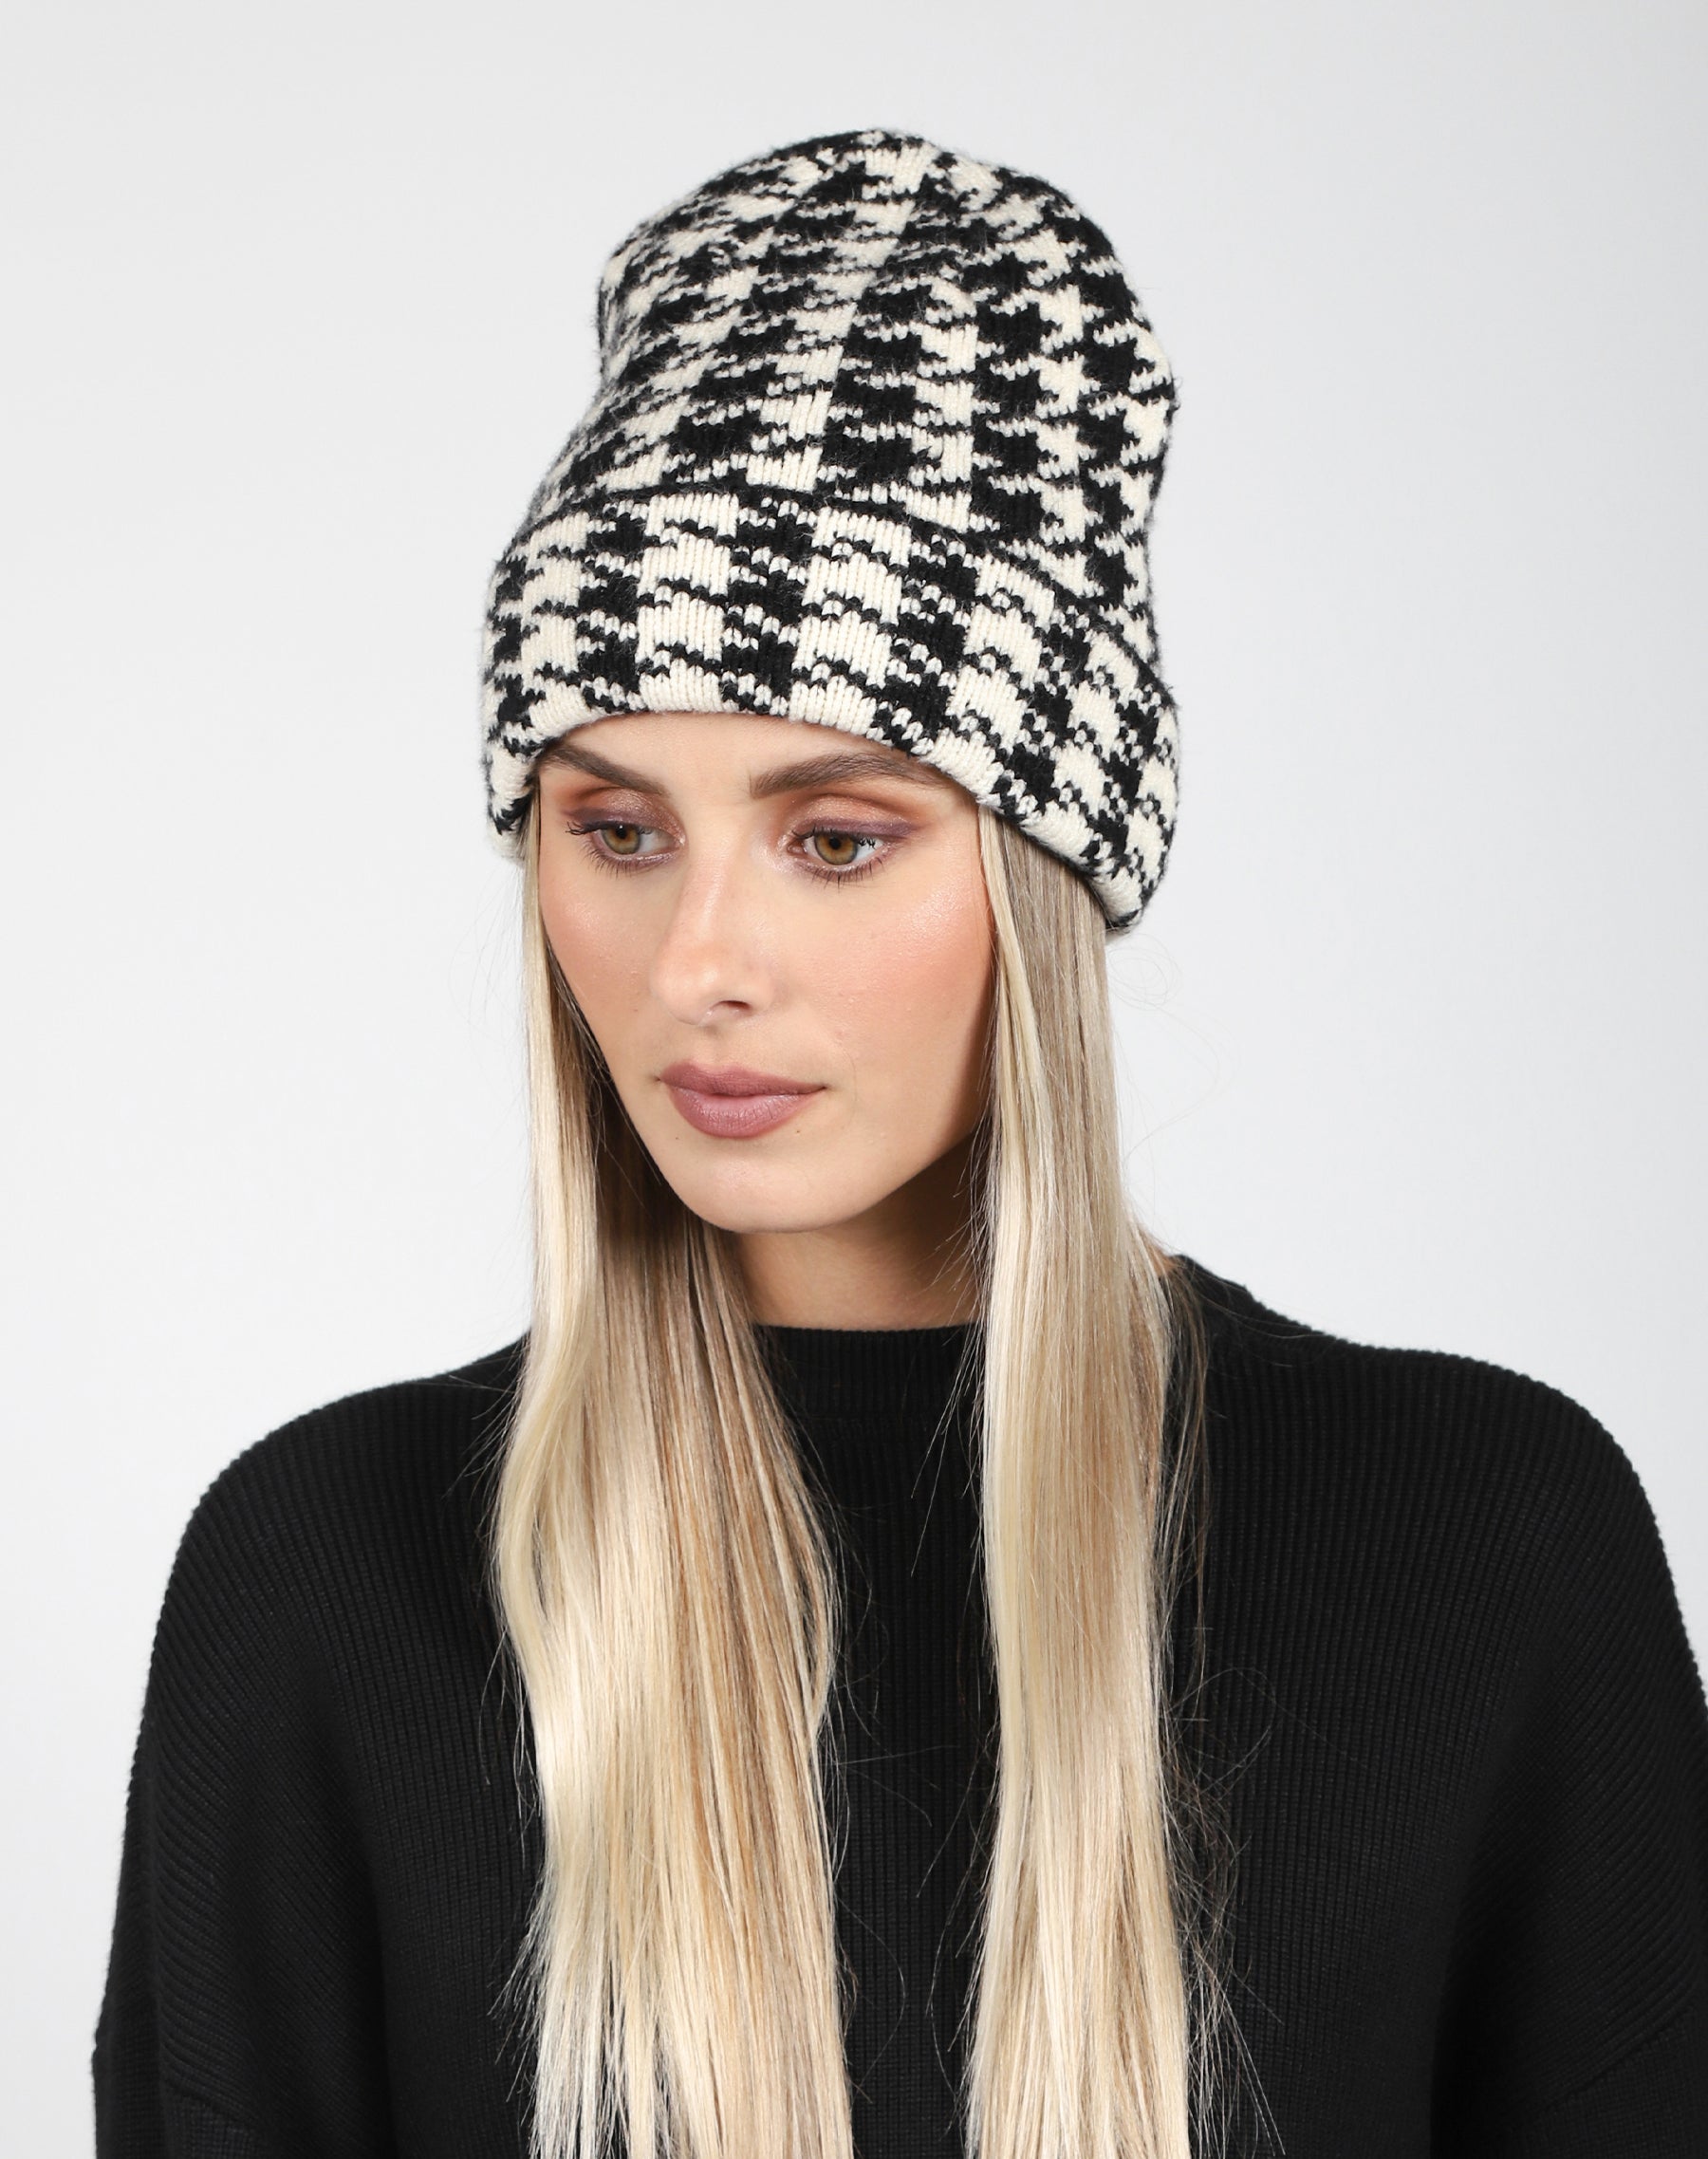 The Houndstooth Toque | Houndstooth